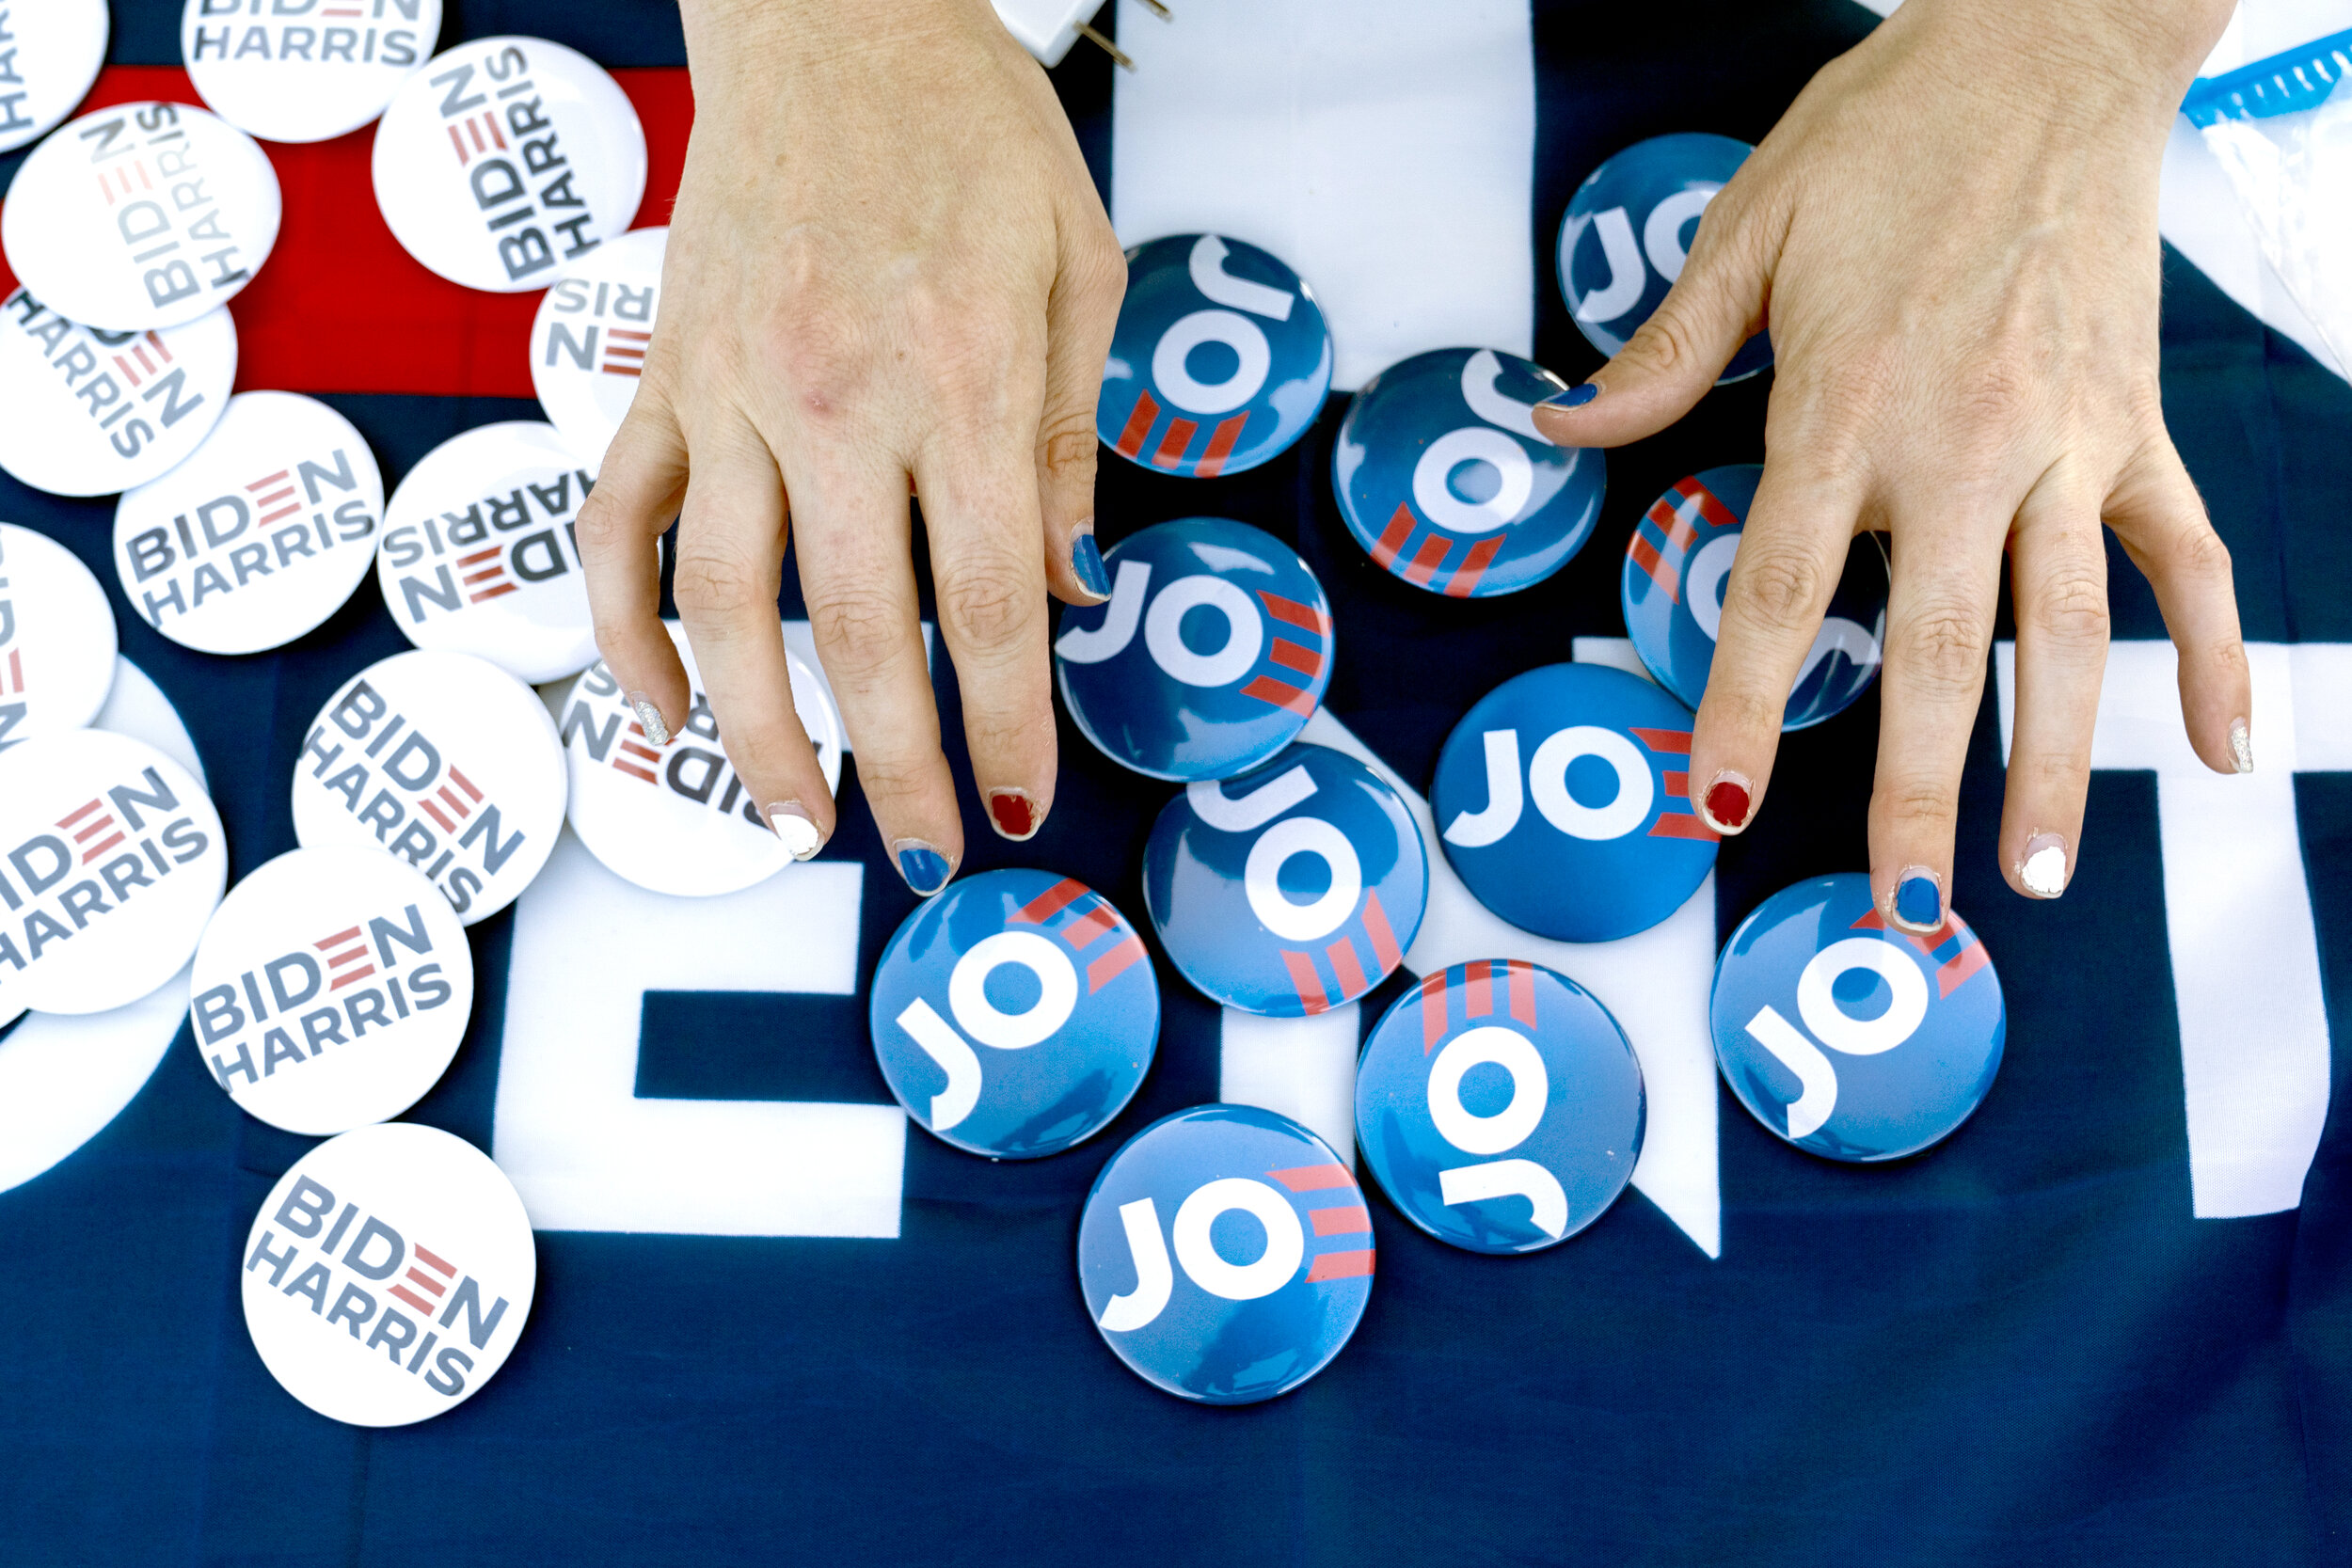  A volunteer arranges buttons at a DNC watch party at the Admiral Twin Drive In in Tulsa, Oklahoma on August 20, 2020. (Photo by Nick Oxford for The Washington Post) 